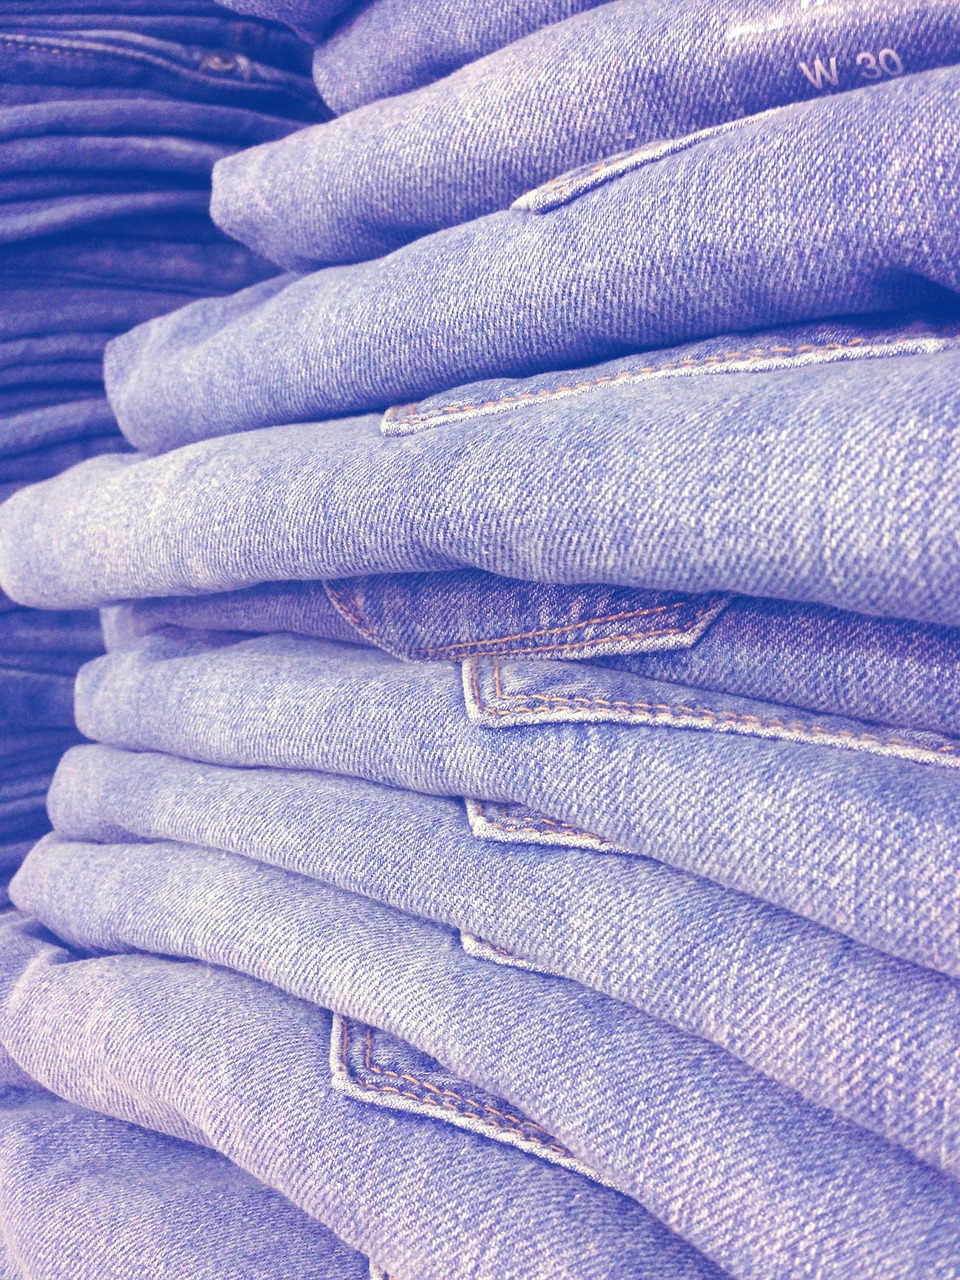 jeans jean stack blue canvas free photo